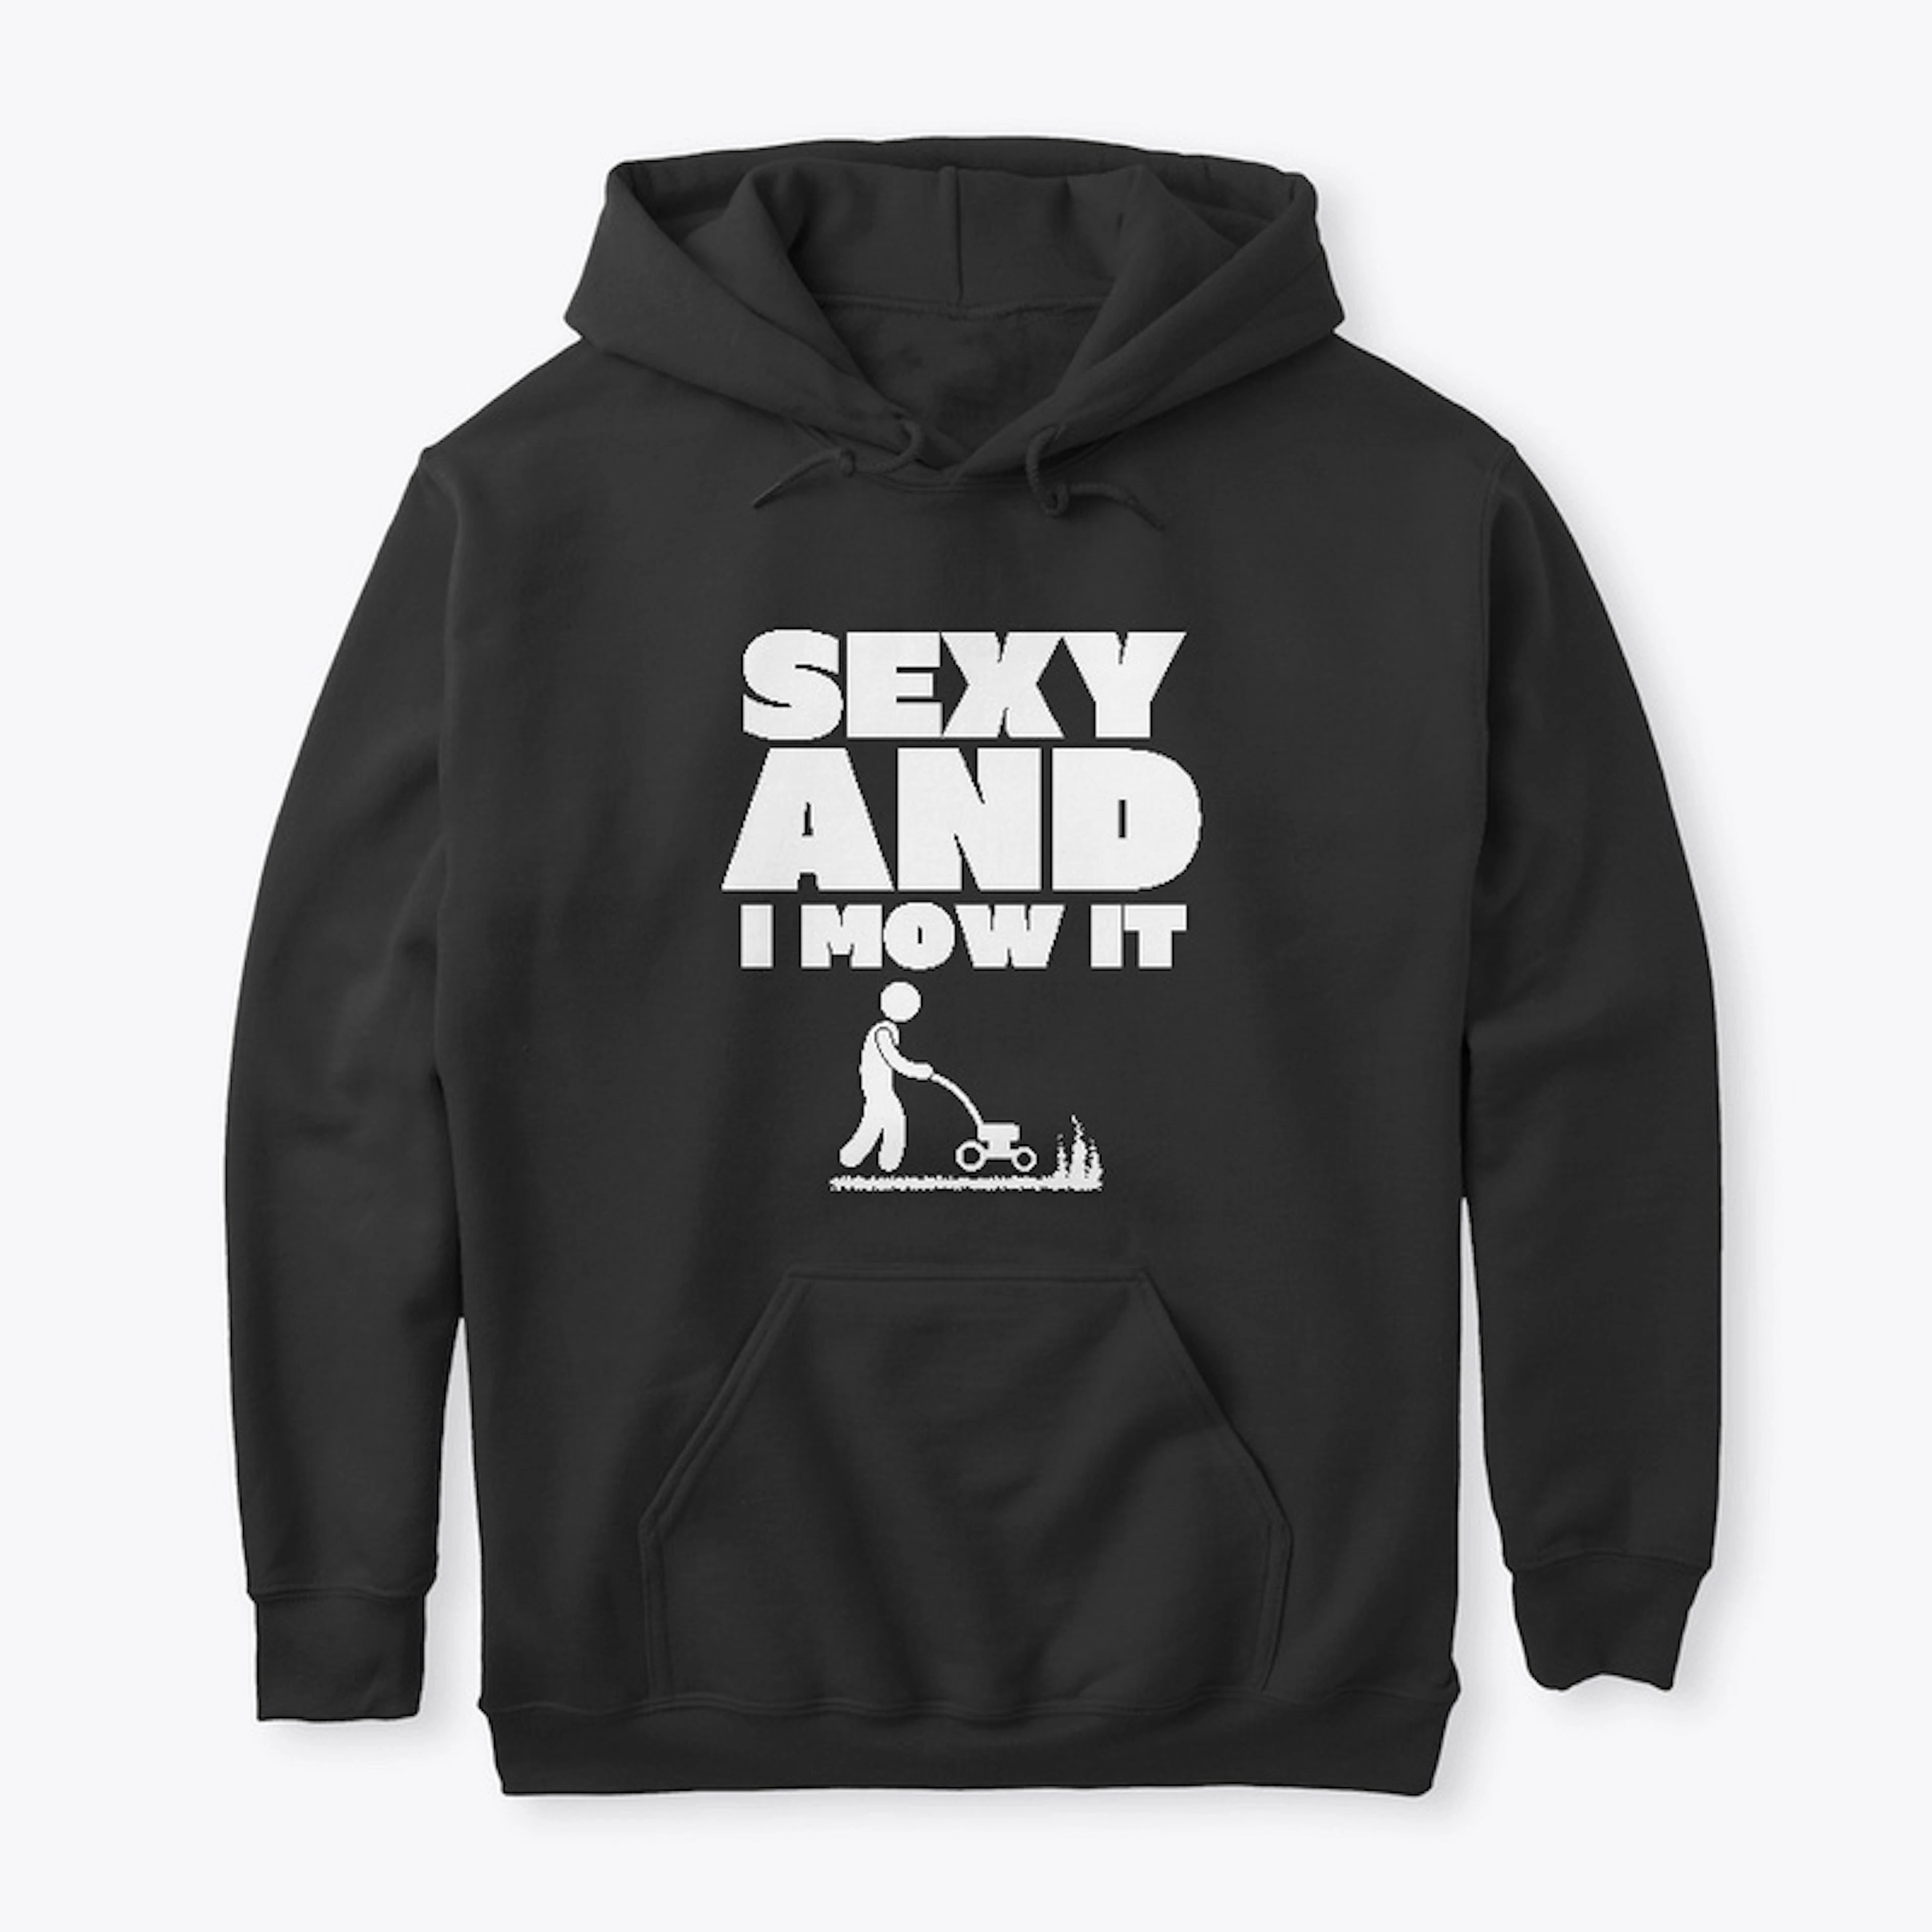 Sexy and I Mow It t-shirt & hoodie